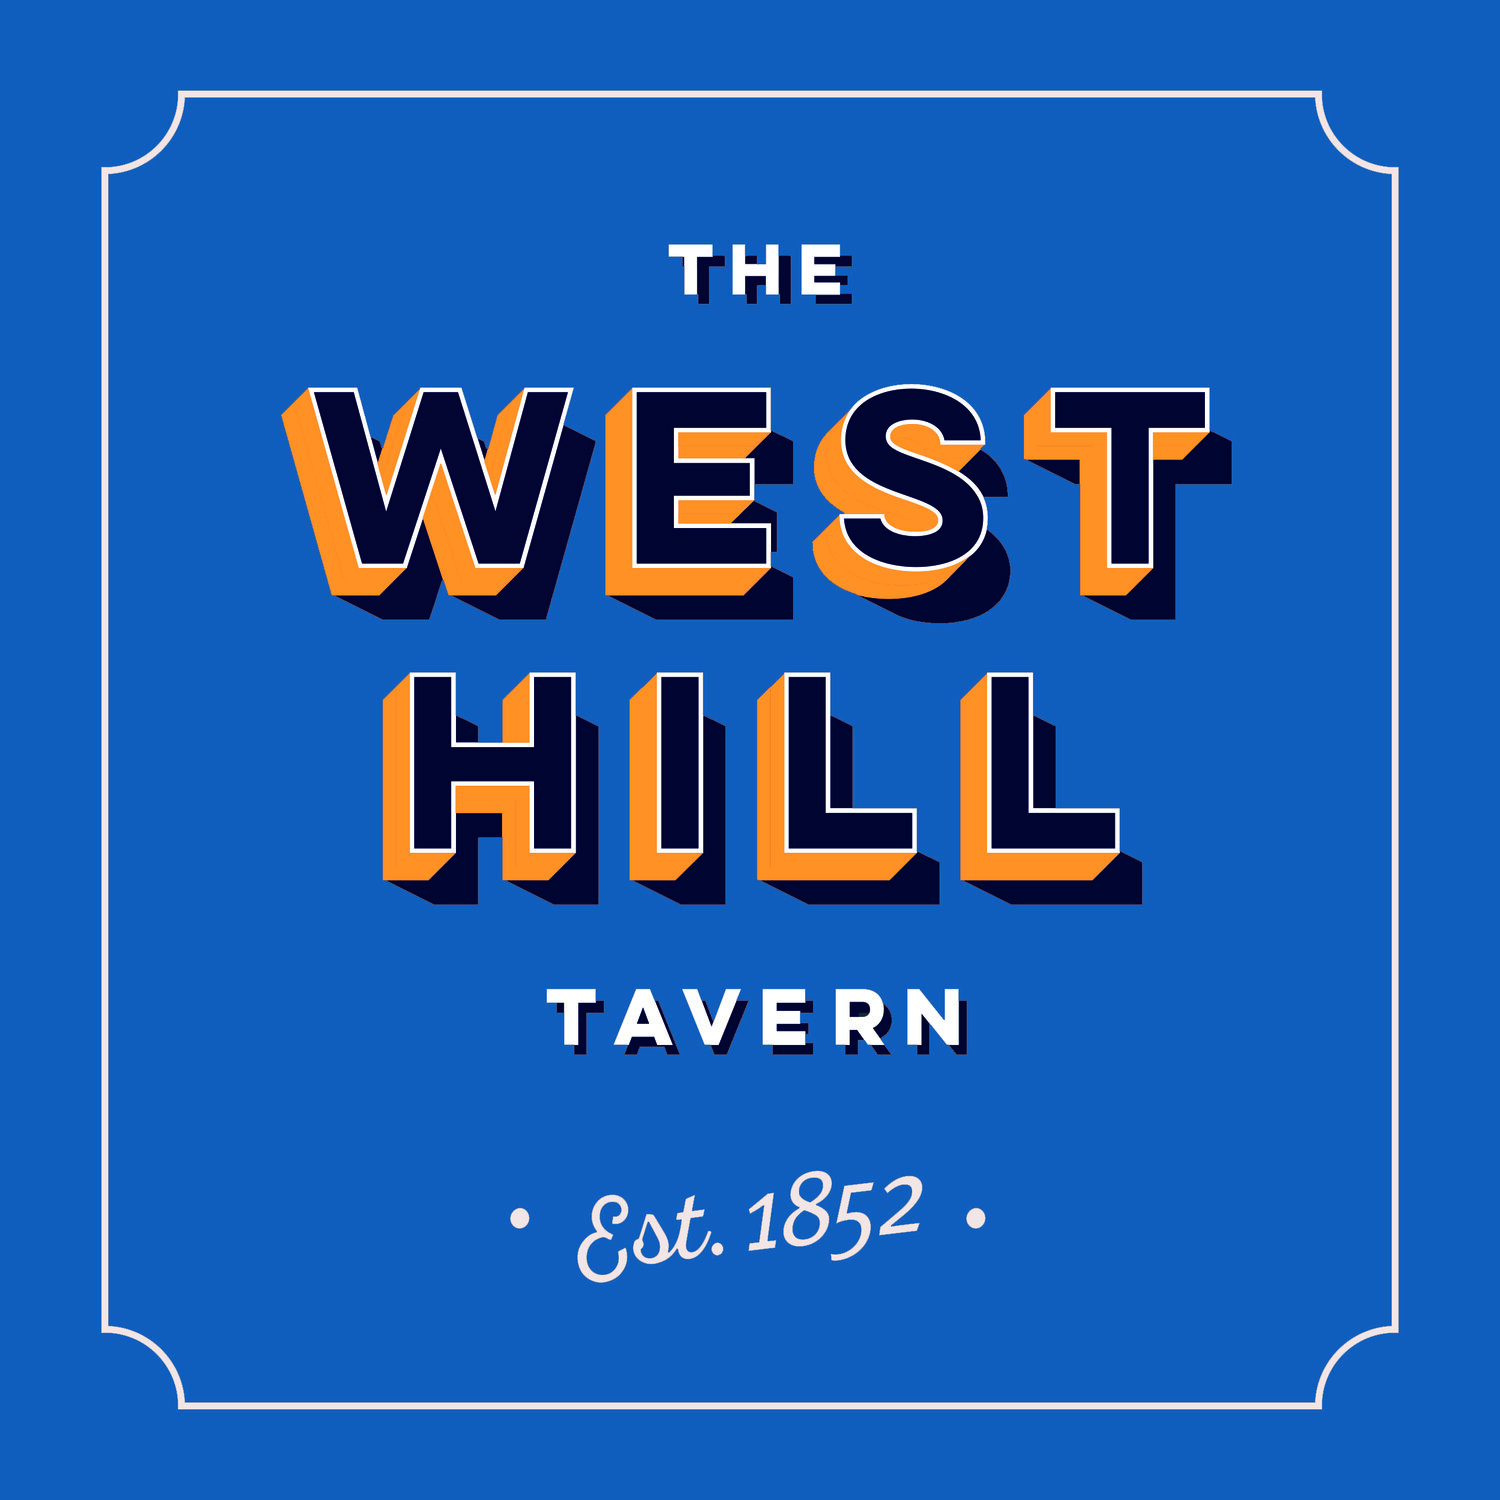 The West Hill Tavern 